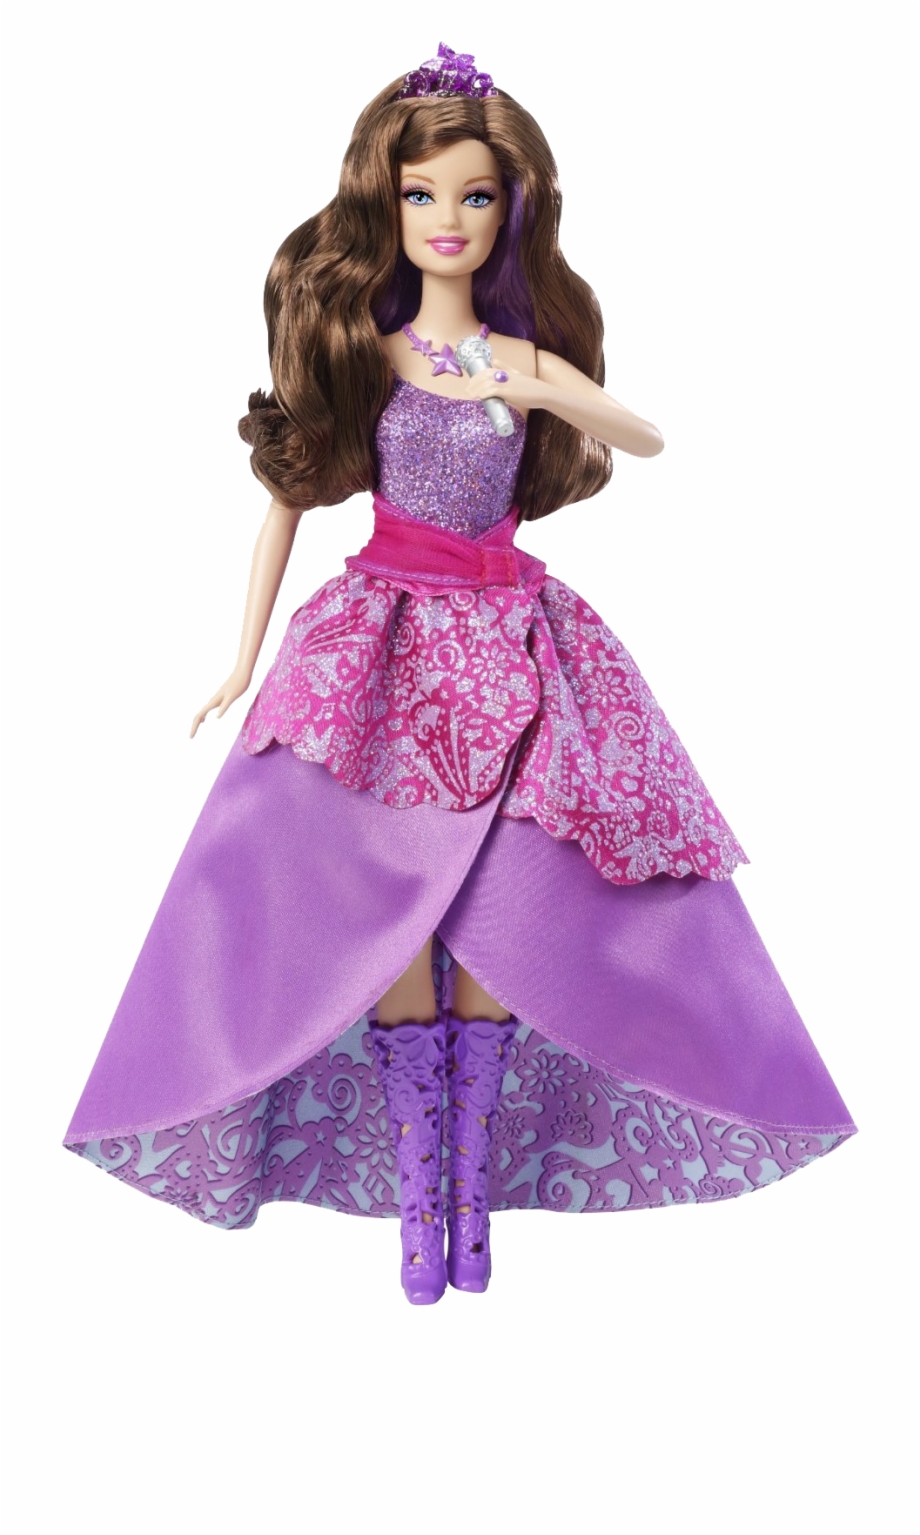 Doll Png Free Download Barbie The Princess And